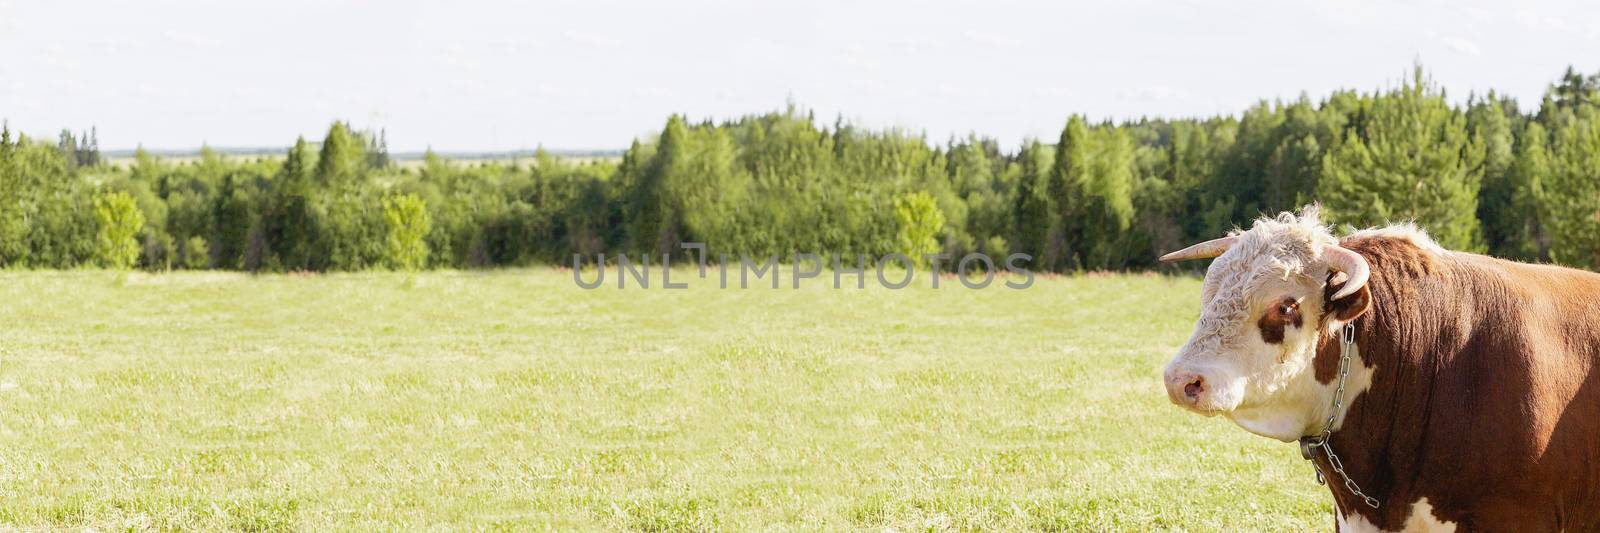 bull's head on the background of a green summer meadow and forest, banner, concept of dairy products. zodiac sign Taurus, Eastern horoscope bull, symbol of 2021, calendar, new year, Christmas by Pirlik